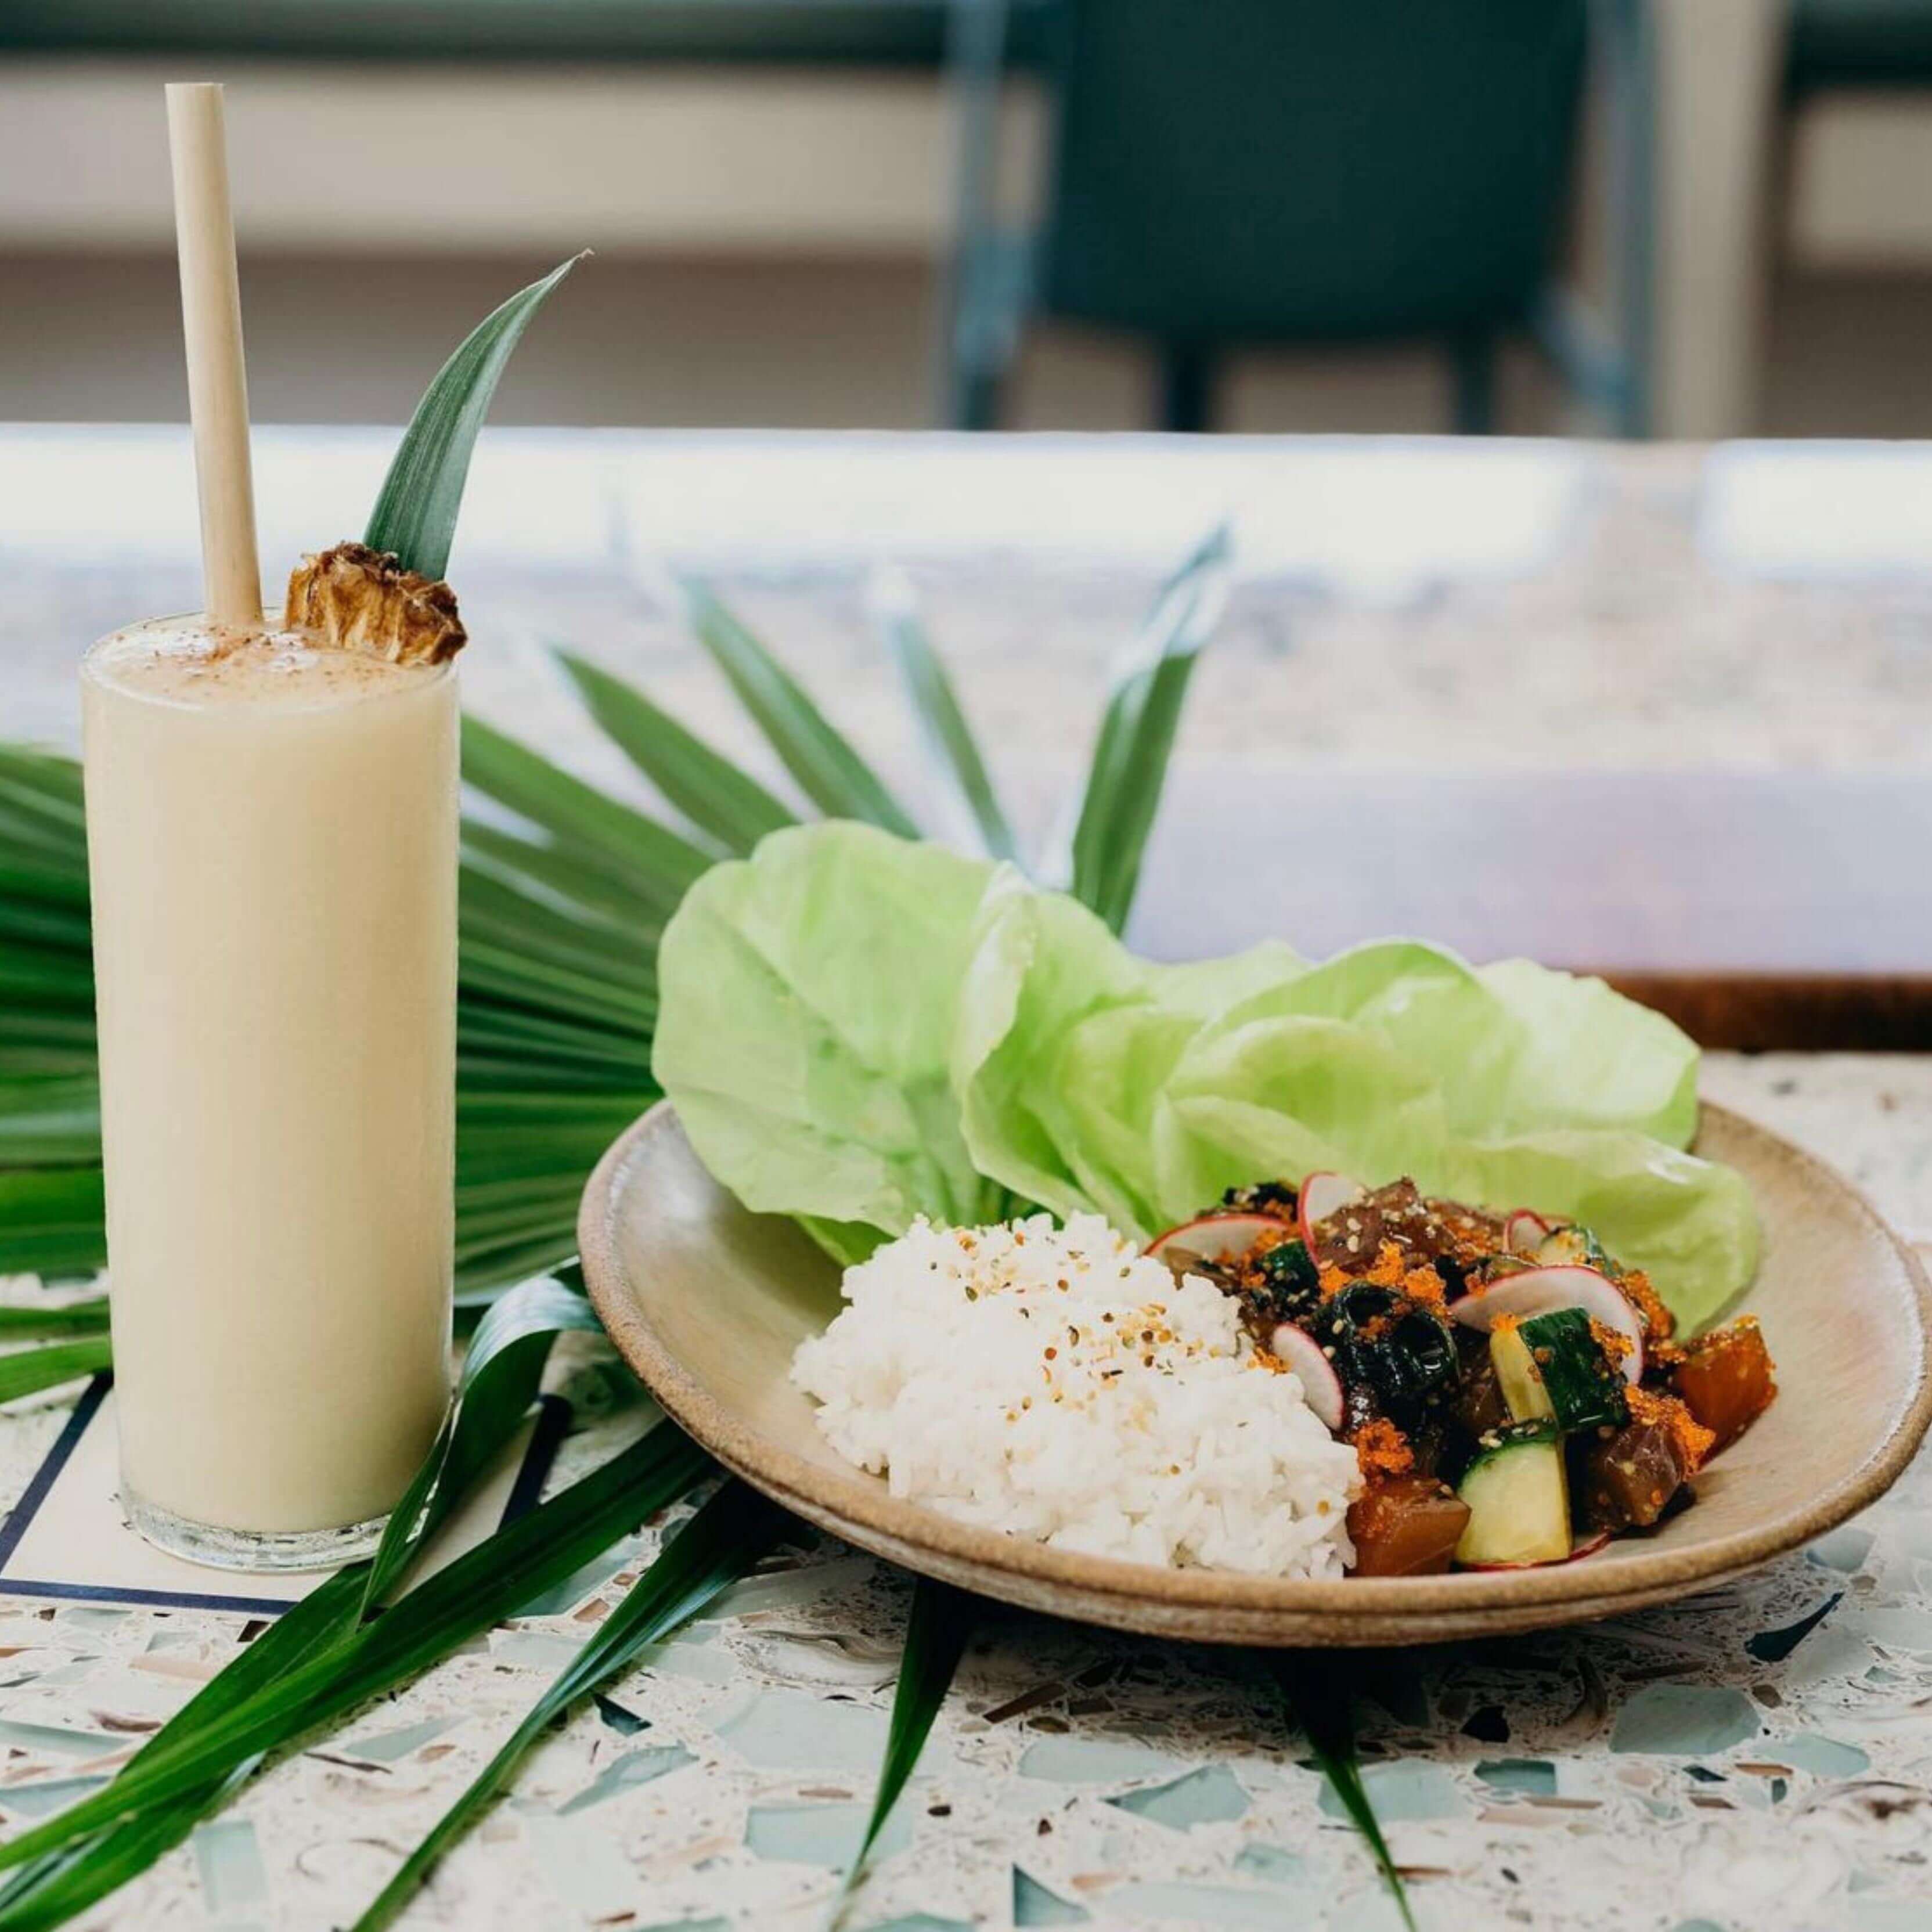 A piña colada garnished with a dried pineapple slice and a leaf is served in a tall glass with a bamboo-like straw made from reed stems. Next to it is a plate containing rice, lettuce leaves, and a mixed vegetable and seafood dish, all set on a patterned table with palm leaves. The arrangement creates a fresh and tropical atmosphere, emphasizing a sustainable and nature-inspired aesthetic.